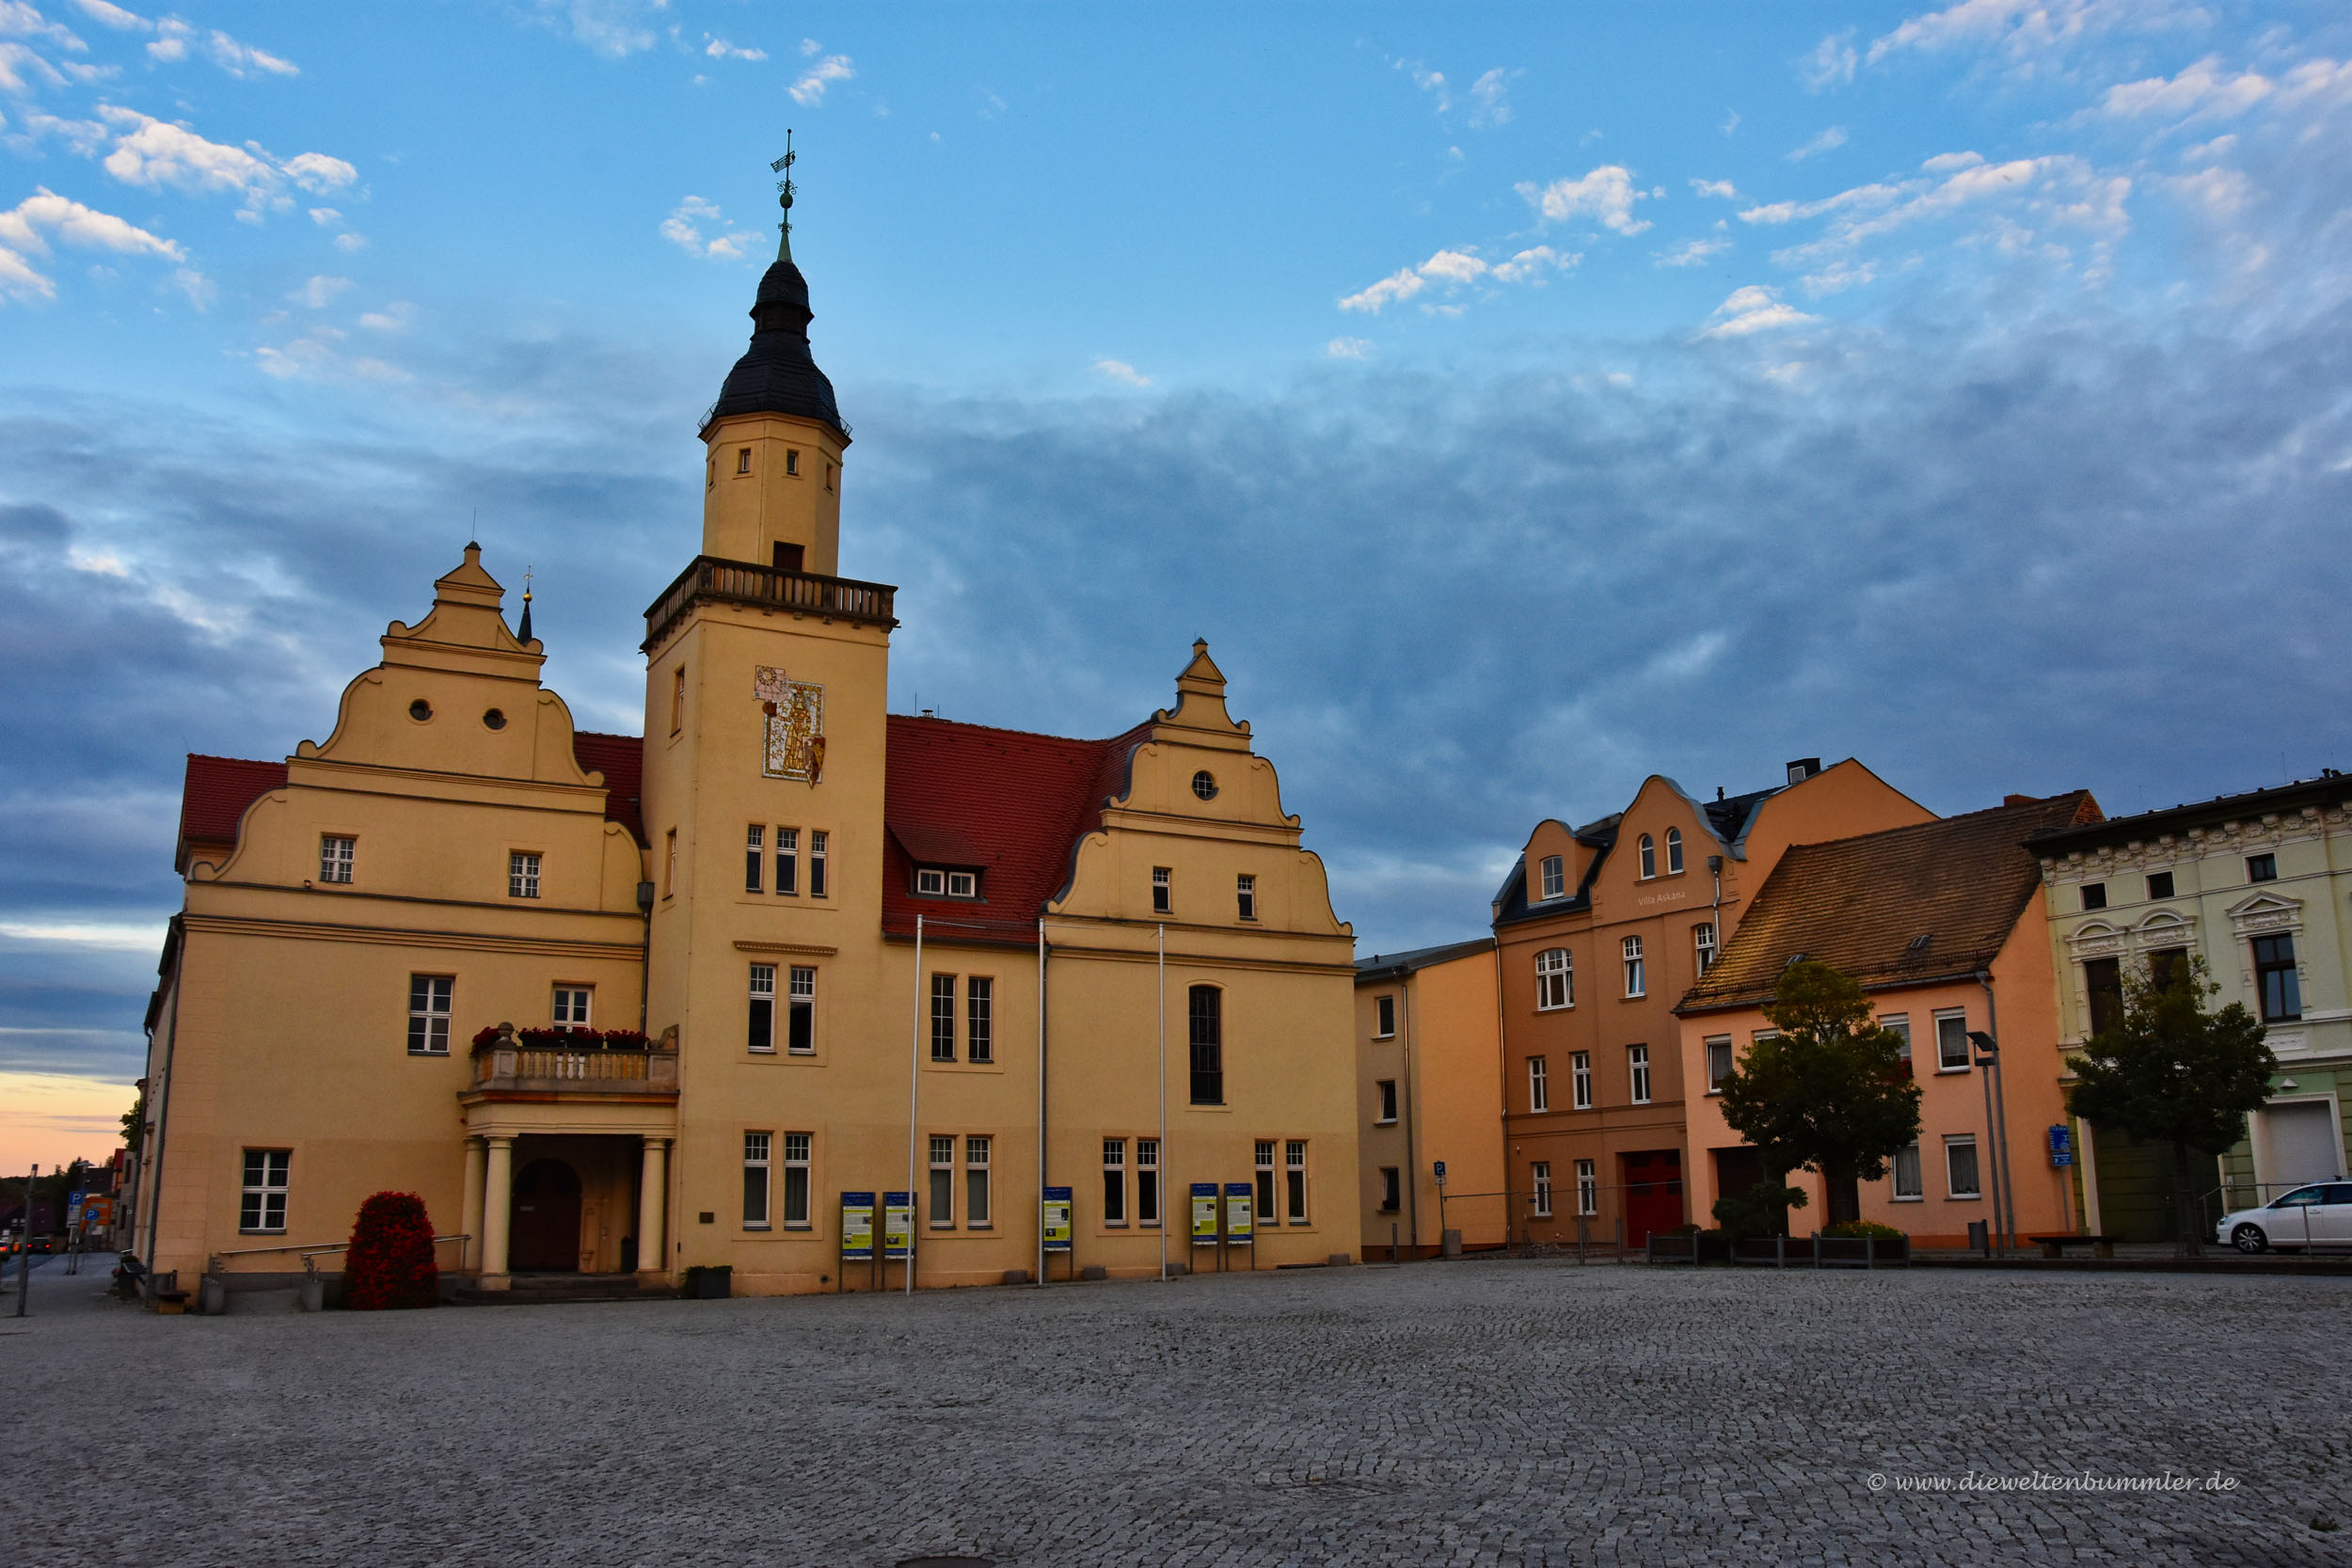 Abends in Coswig in Anhalt